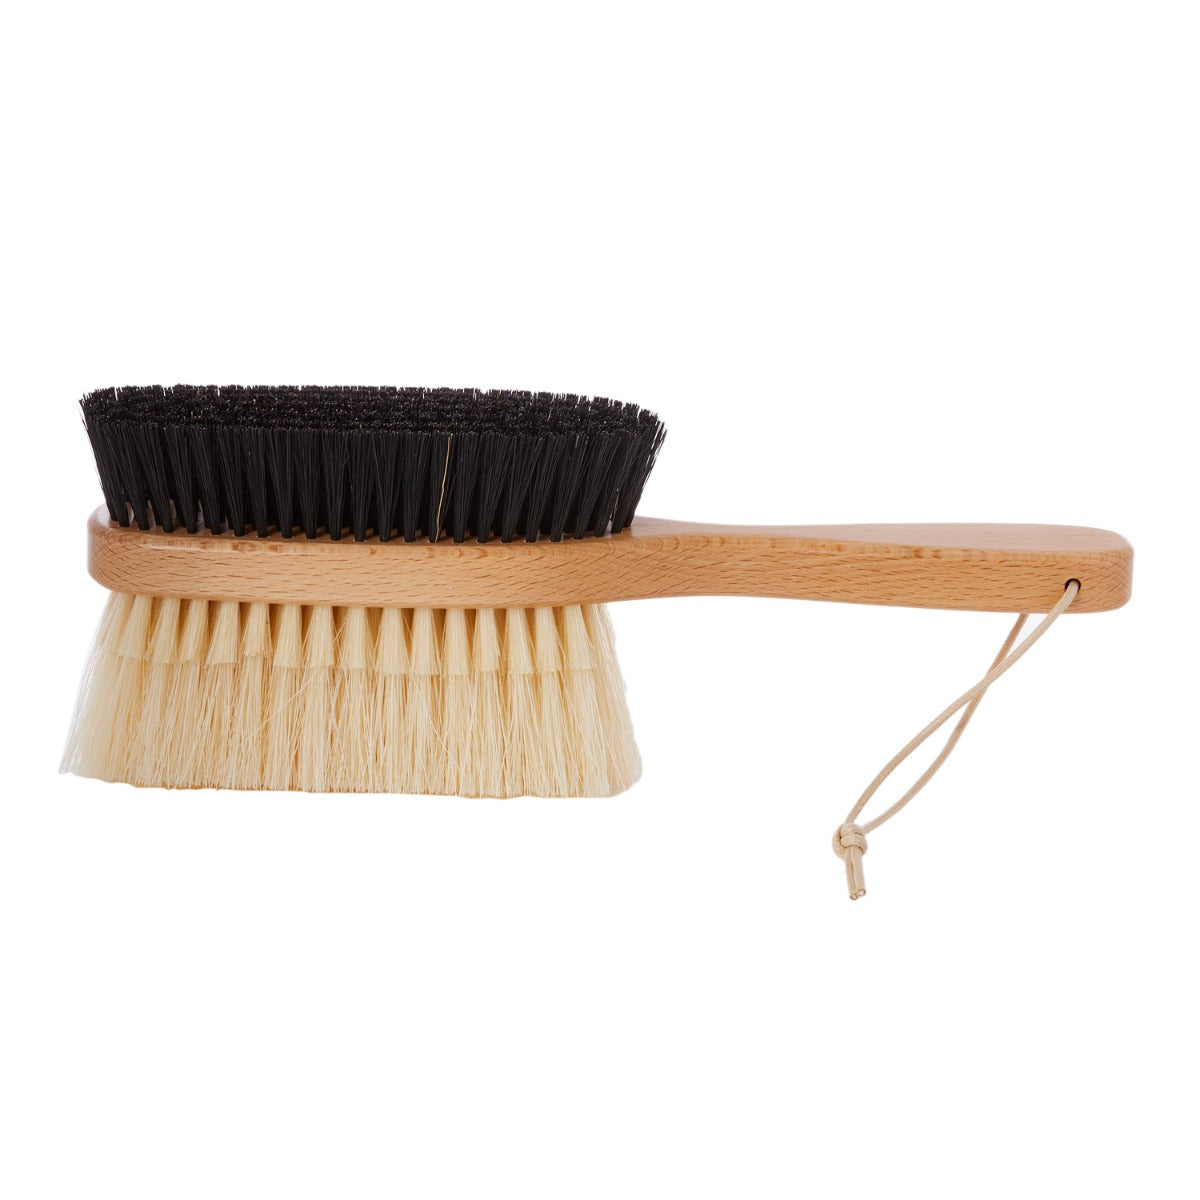 Clothing Brush for Wool, Textile or Fabric Materials by Valentino Garemi